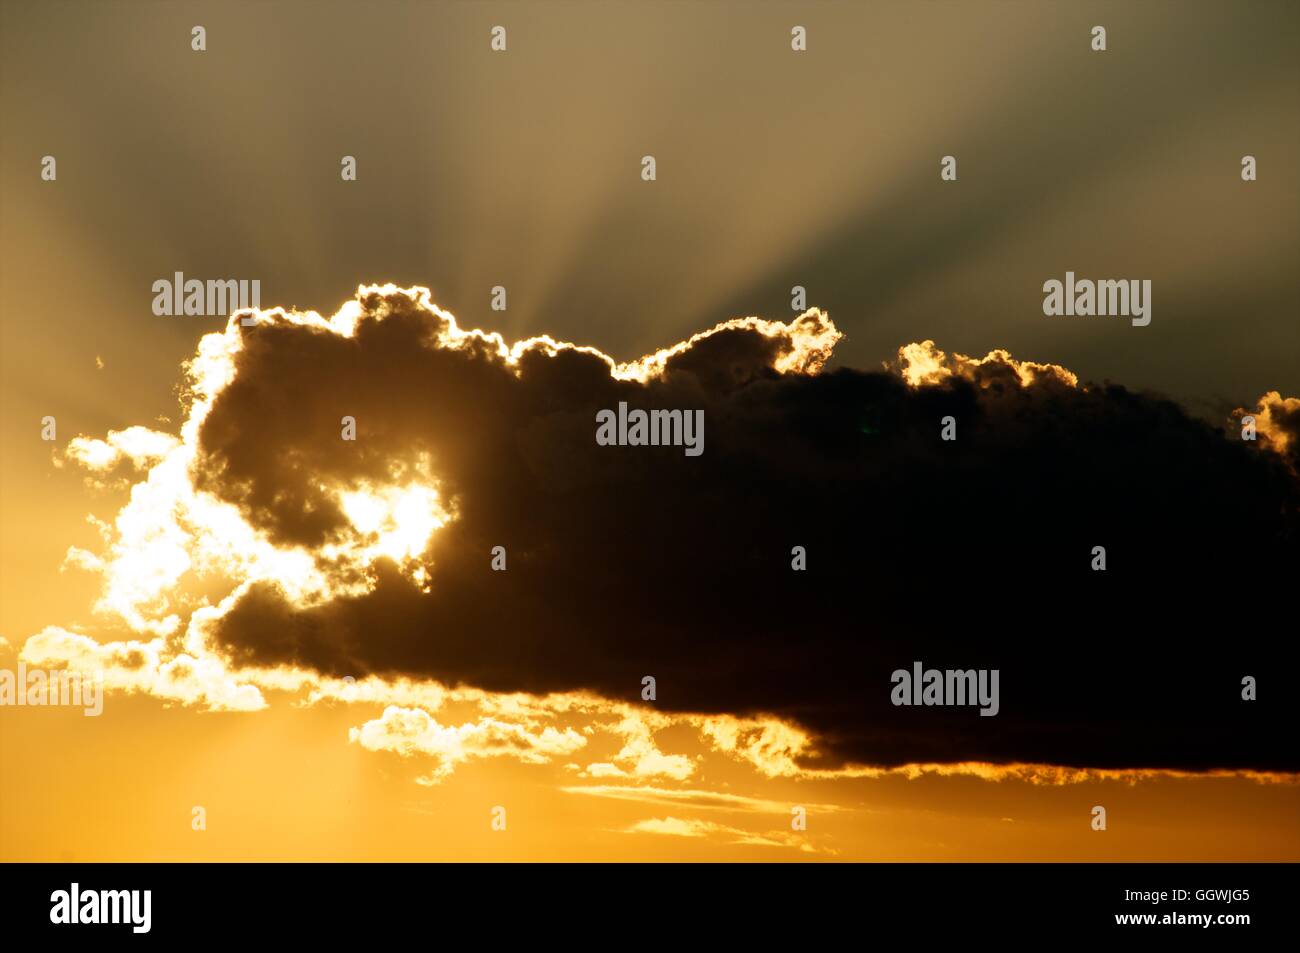 Large cloud obscuring sun at sunset. Stock Photo